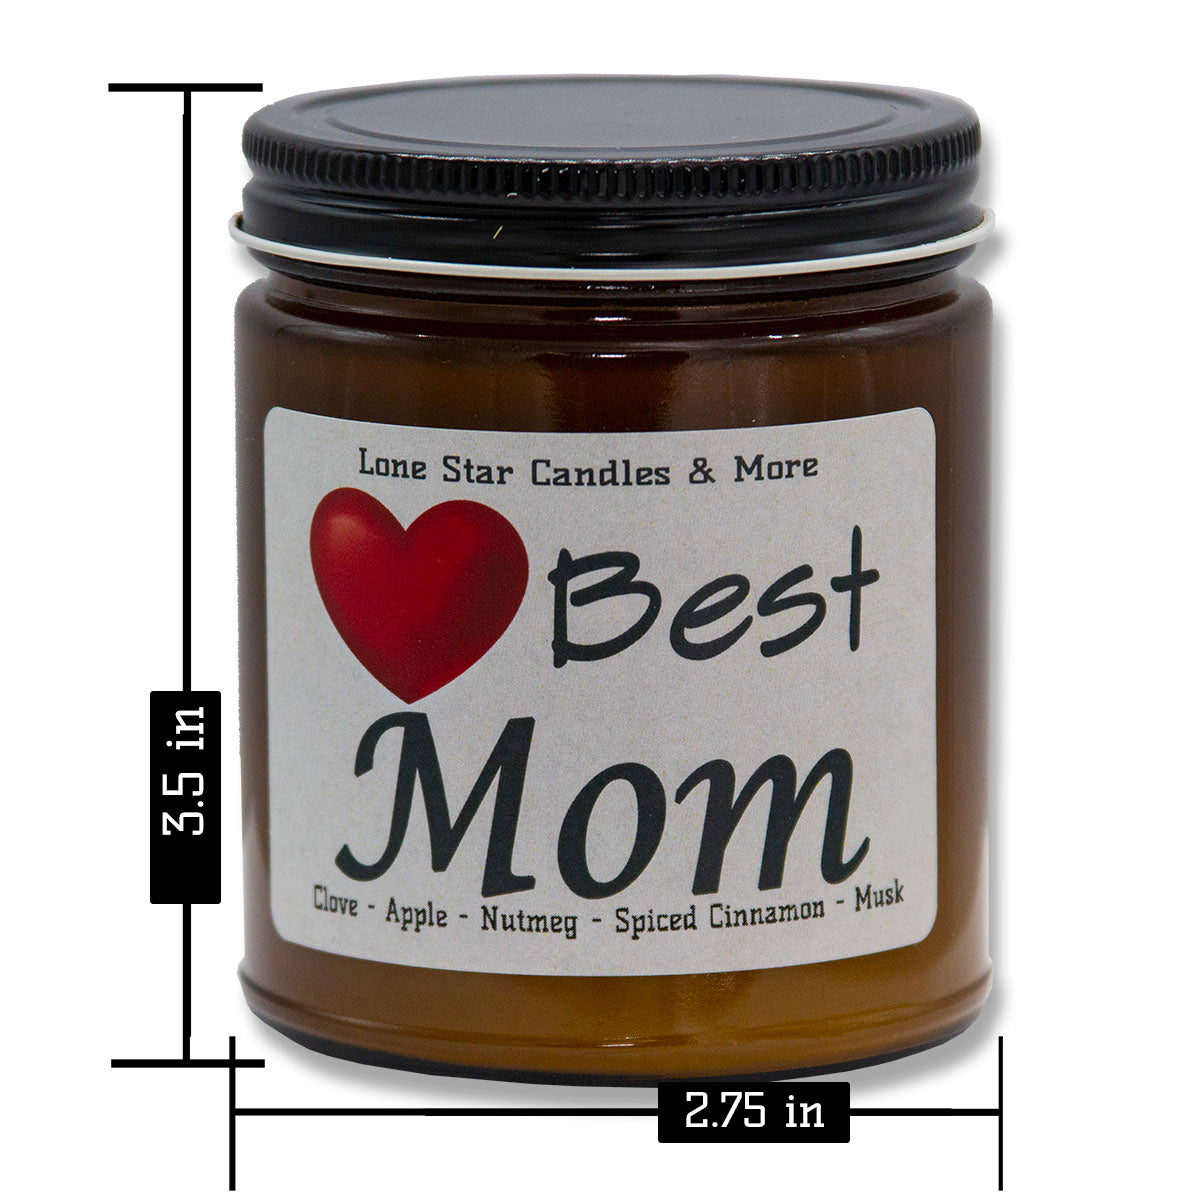 Mulled Cider, Lone Star Candles & More's Premium Hand Poured Strongly Scented Soy Wax Gift Candle, The scent of Sweet N Spicy Cider, USA Made in Texas, Round Amber Glass Jar 9oz Best Mom